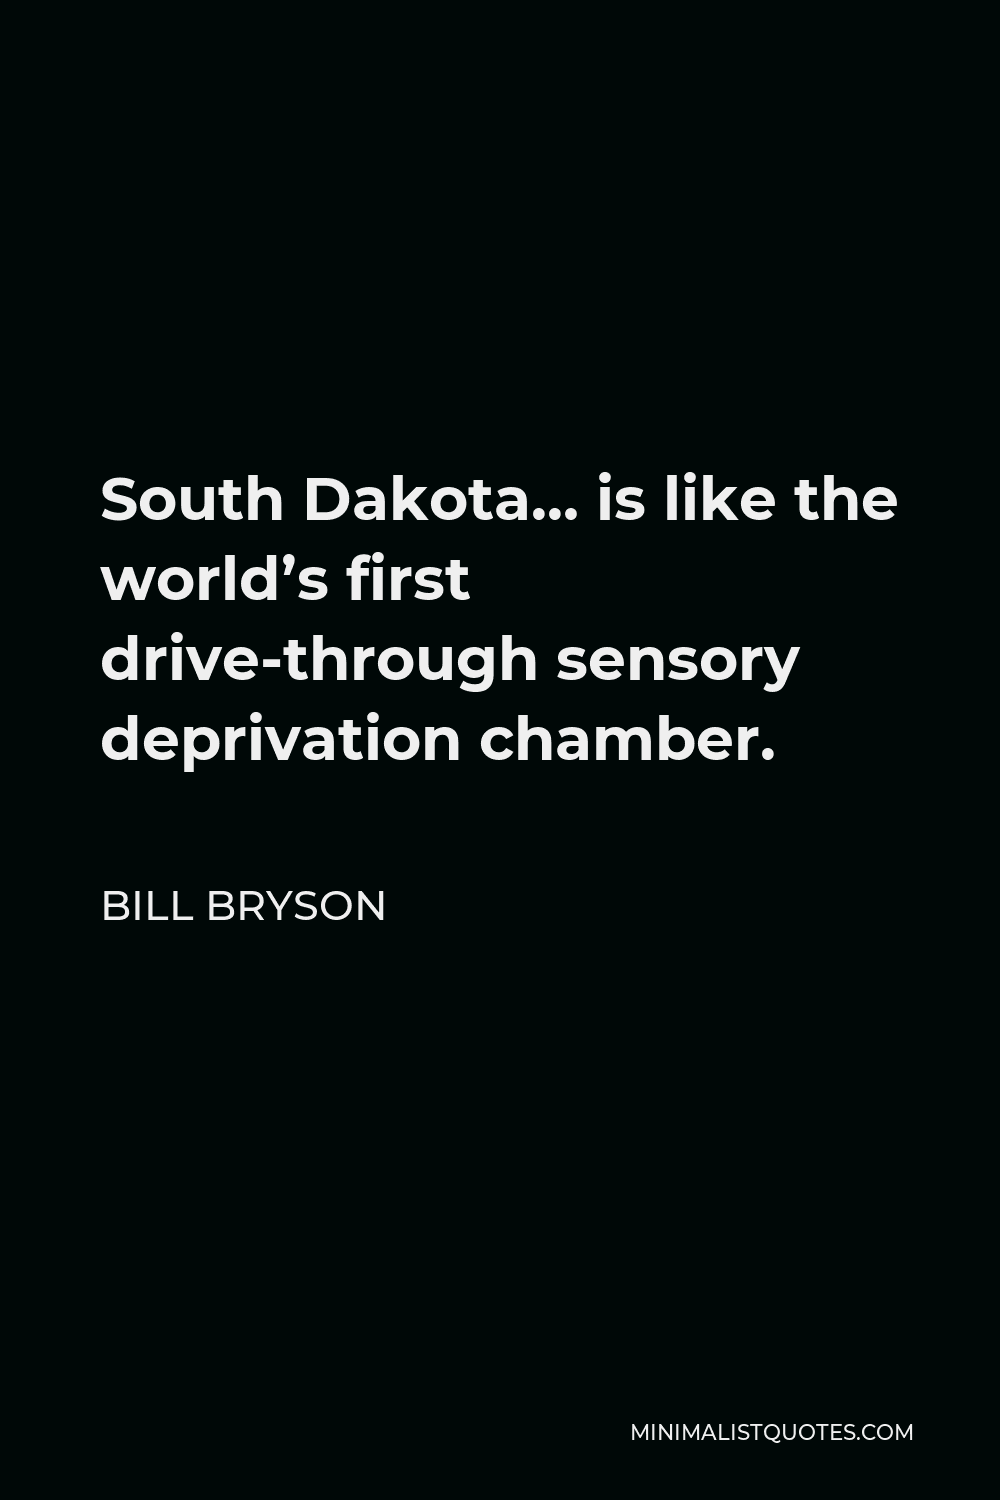 Bill Bryson Quote - South Dakota… is like the world’s first drive-through sensory deprivation chamber.